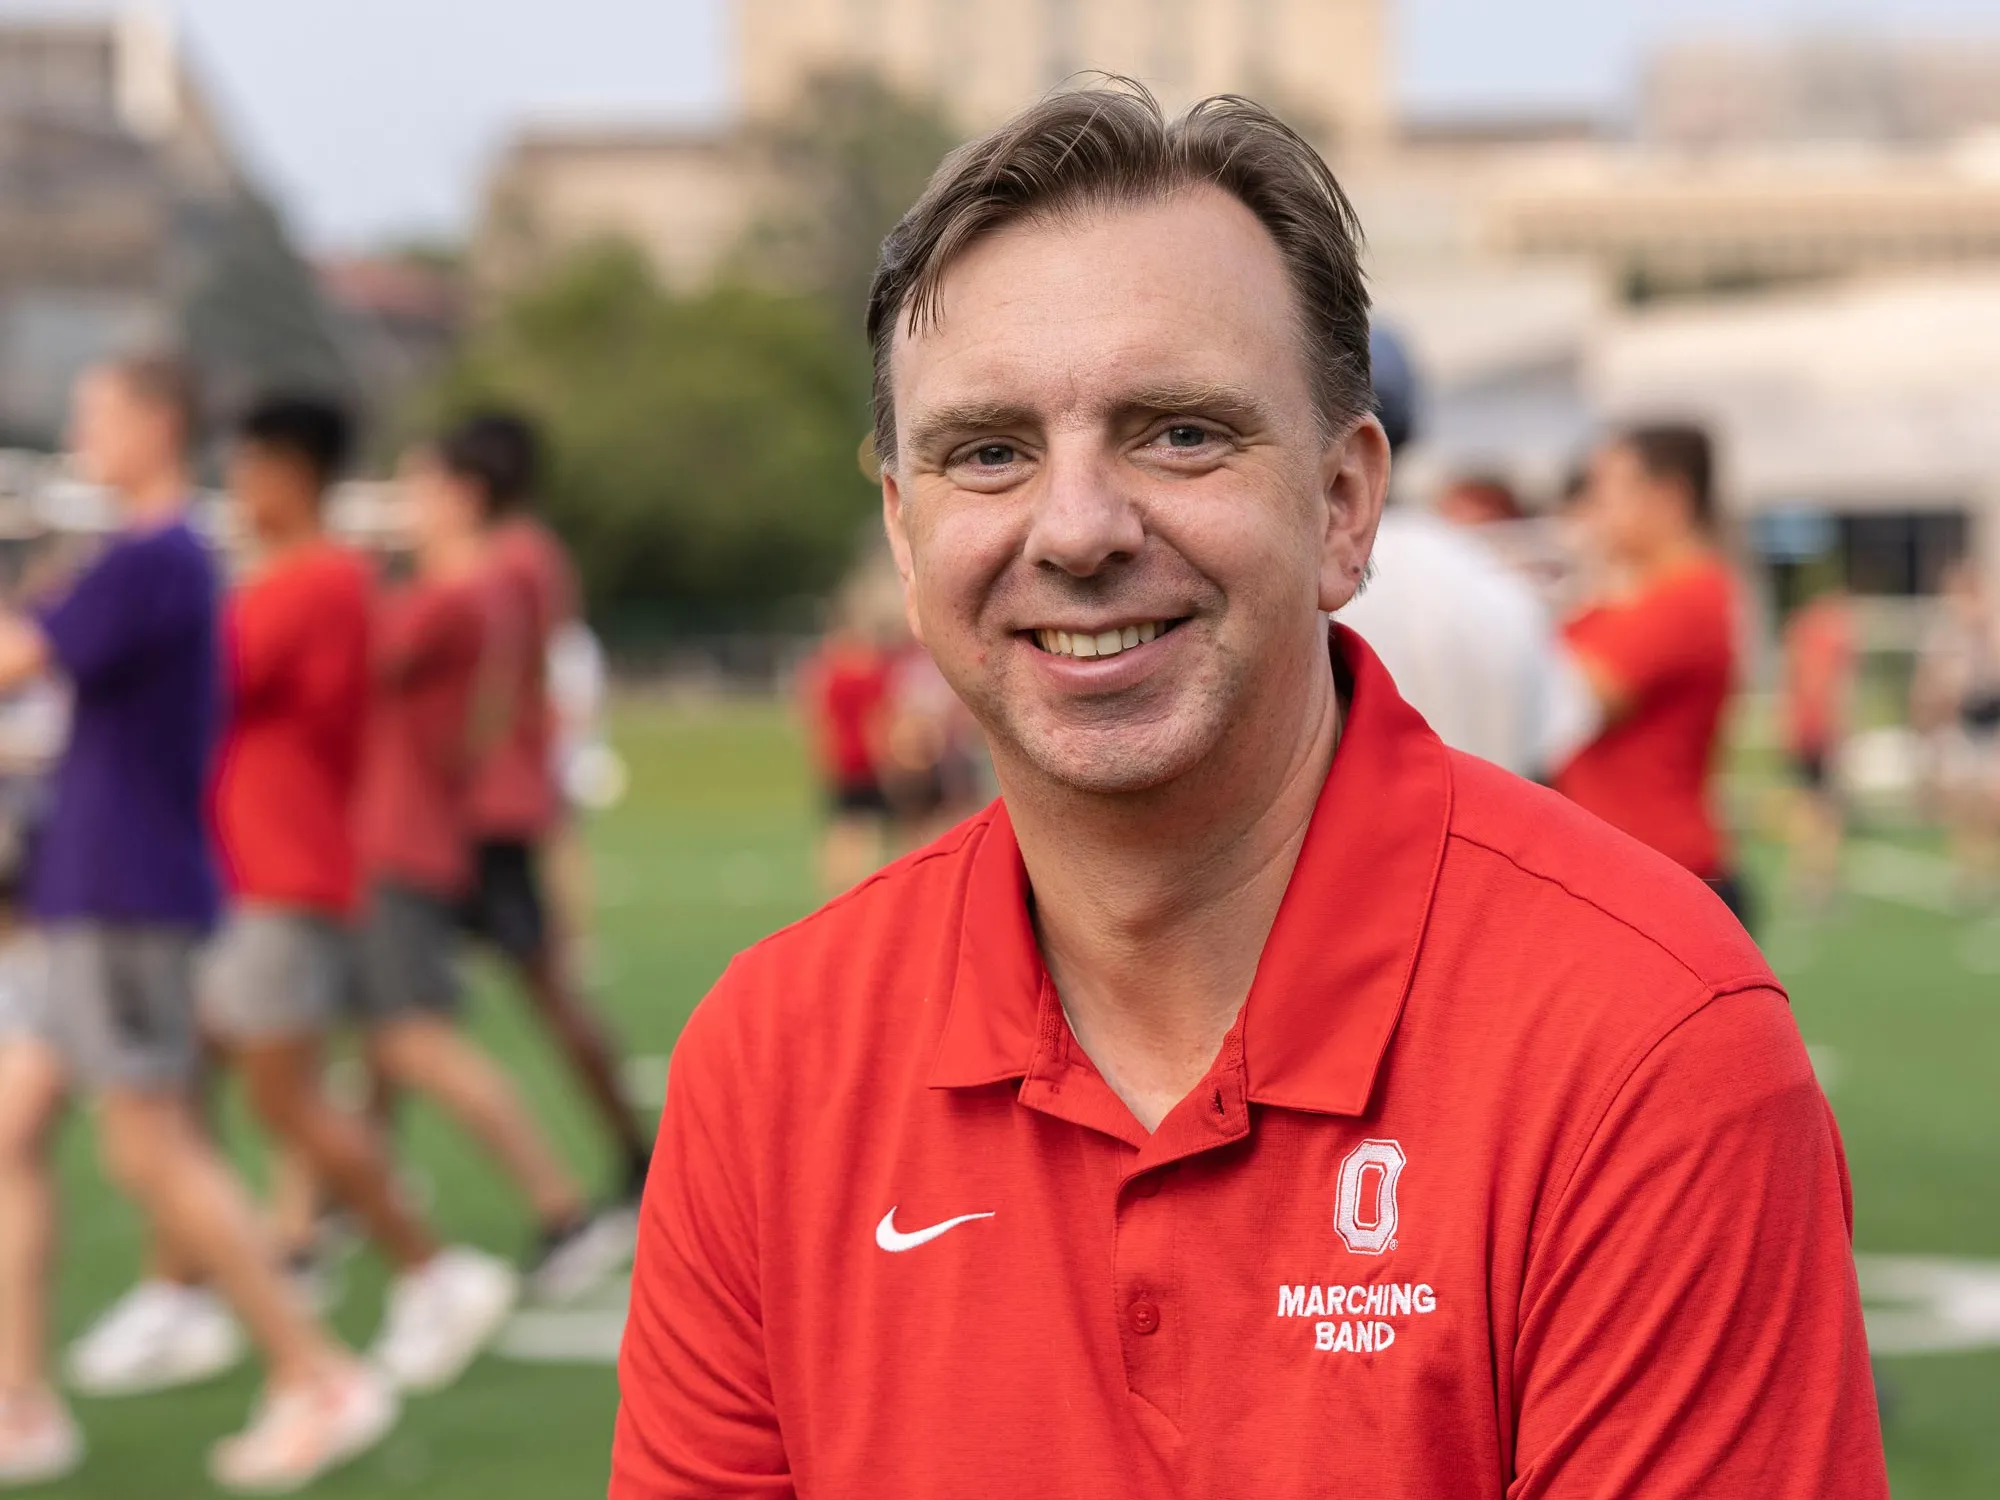 As members of the band practices behind him in their street clothes, marching band director Chris Hoch sits on a stool on the practice field. His hair’s a bit messy, his clothes are casual, and his expression is happy. 